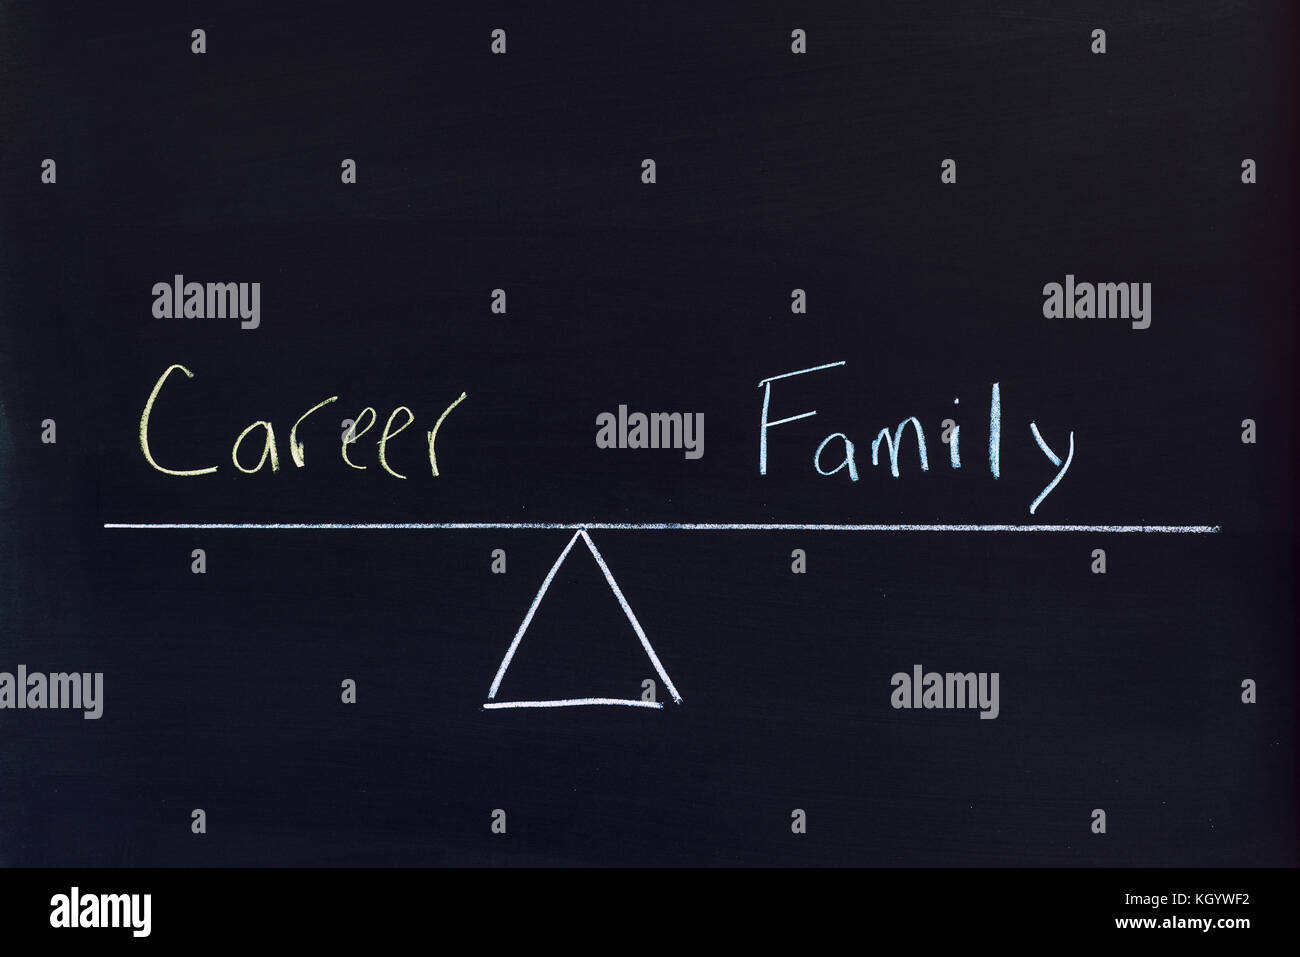 The words Career and Family on a balance scale. Stock Photo